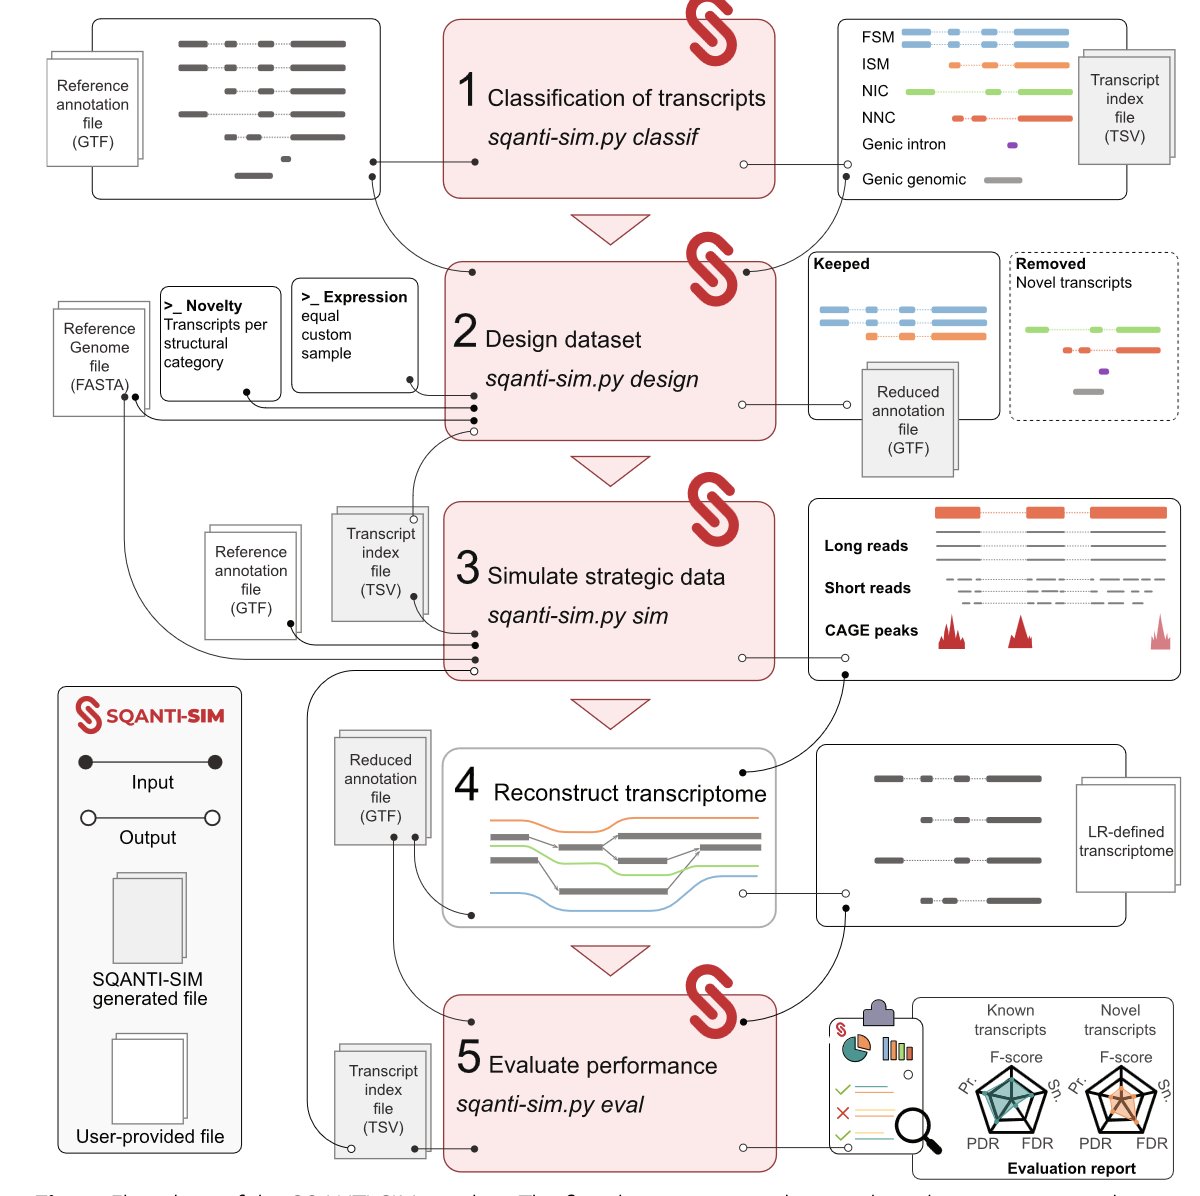 See the latest work from the @Conesa_Lab published in @GenomeBiology. SQANTI-SIM simulates long-read transcriptomics data with realistic novel isoforms and orthogonal datasets, to evaluate novel transcript discovery using long-reads. @PacBio @nanopore tinyurl.com/3c4nxxta